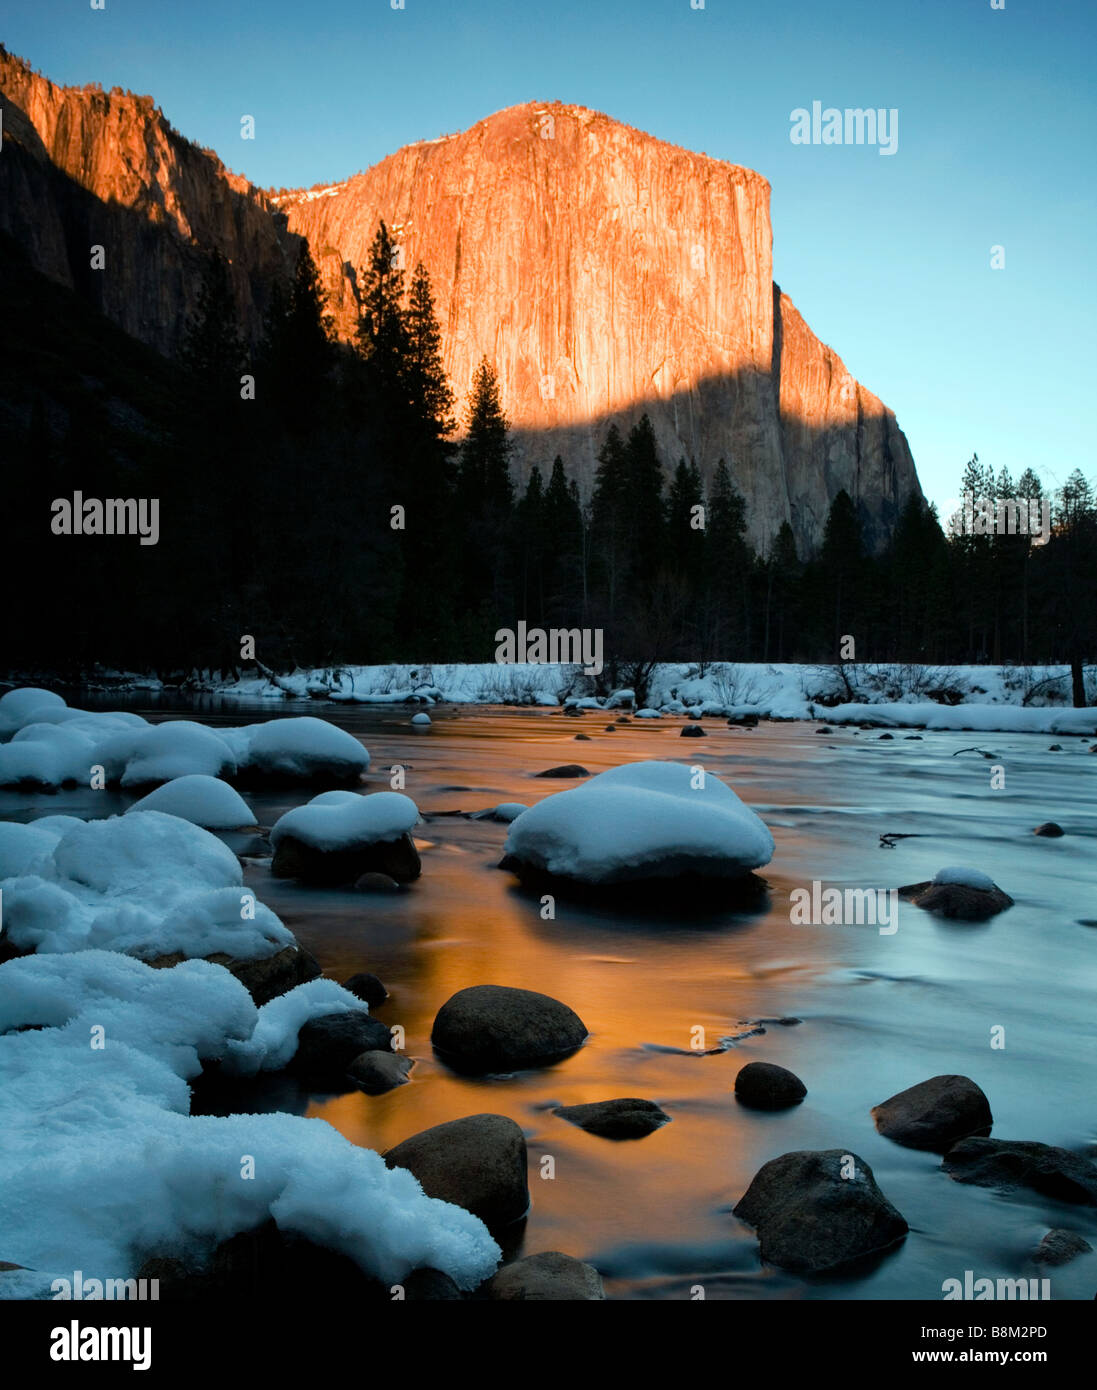 El Capitan and snowy rocks in the Merced river at sunset in Yosemite National Park, USA Stock Photo